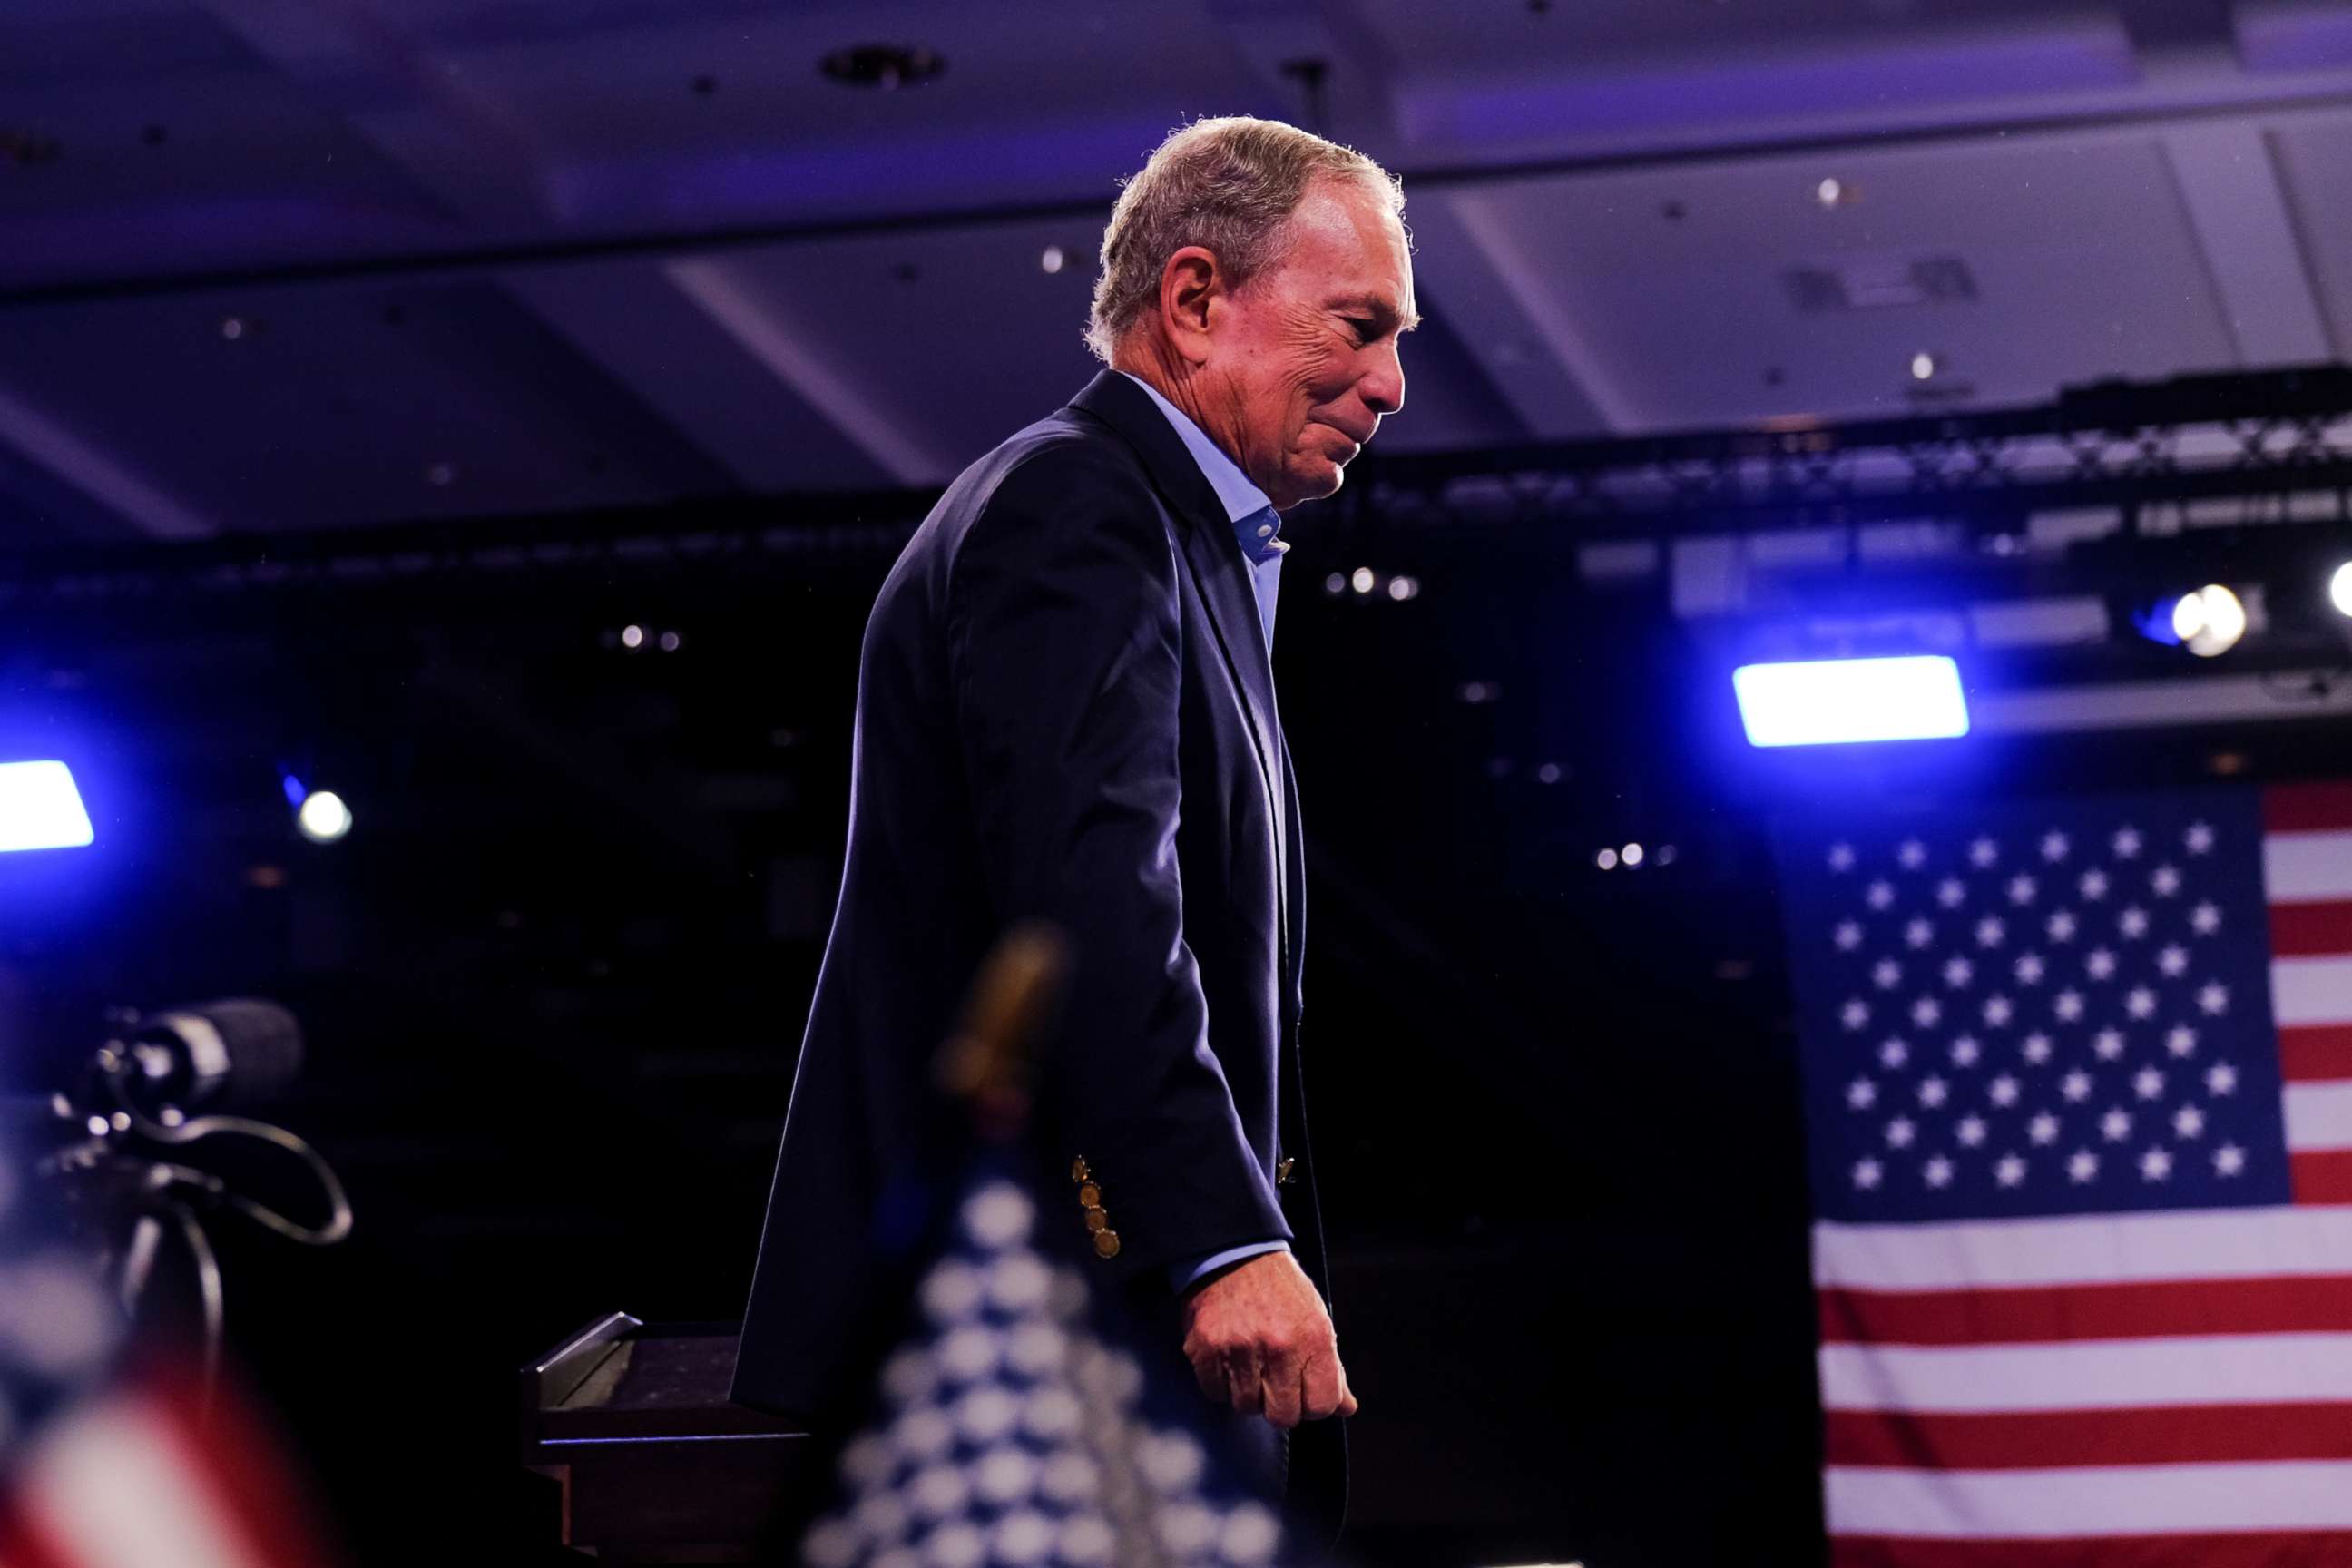 PHOTO: Democratic presidential candidate Michael Bloomberg attends his Super Tuesday night rally in West Palm Beach, Fla., March 3, 2020.